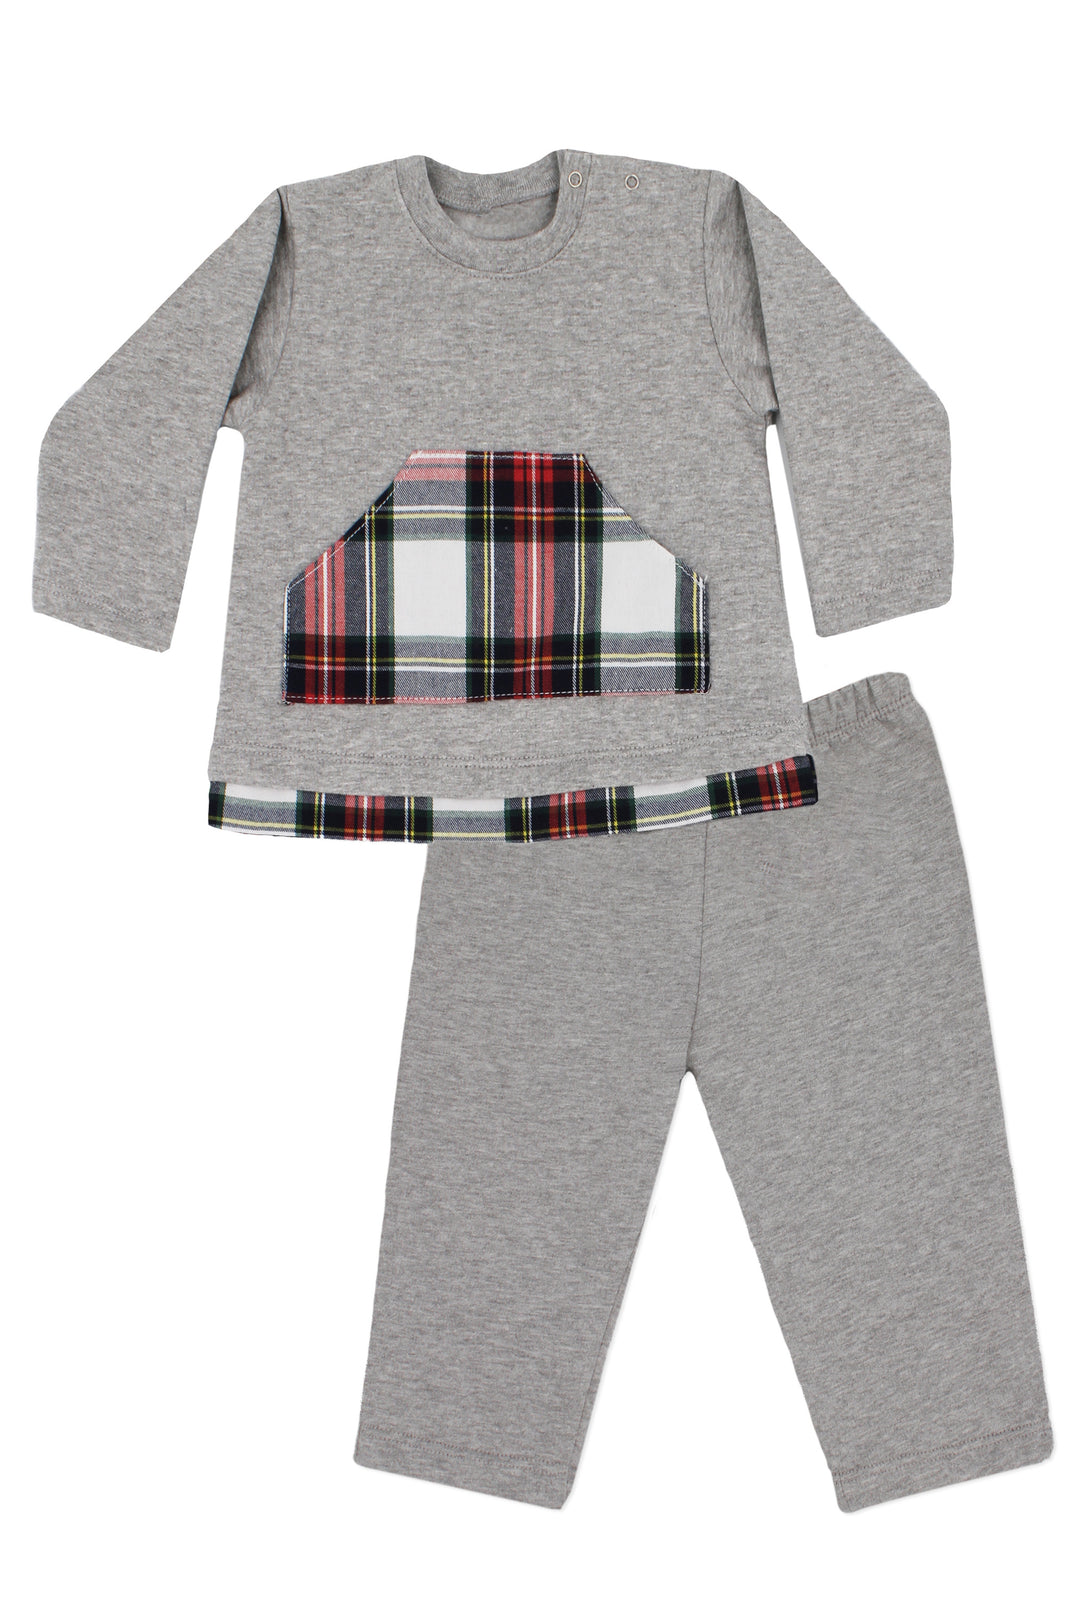 Rapife "Rory" Grey & Red Tartan Tracksuit | Millie and John